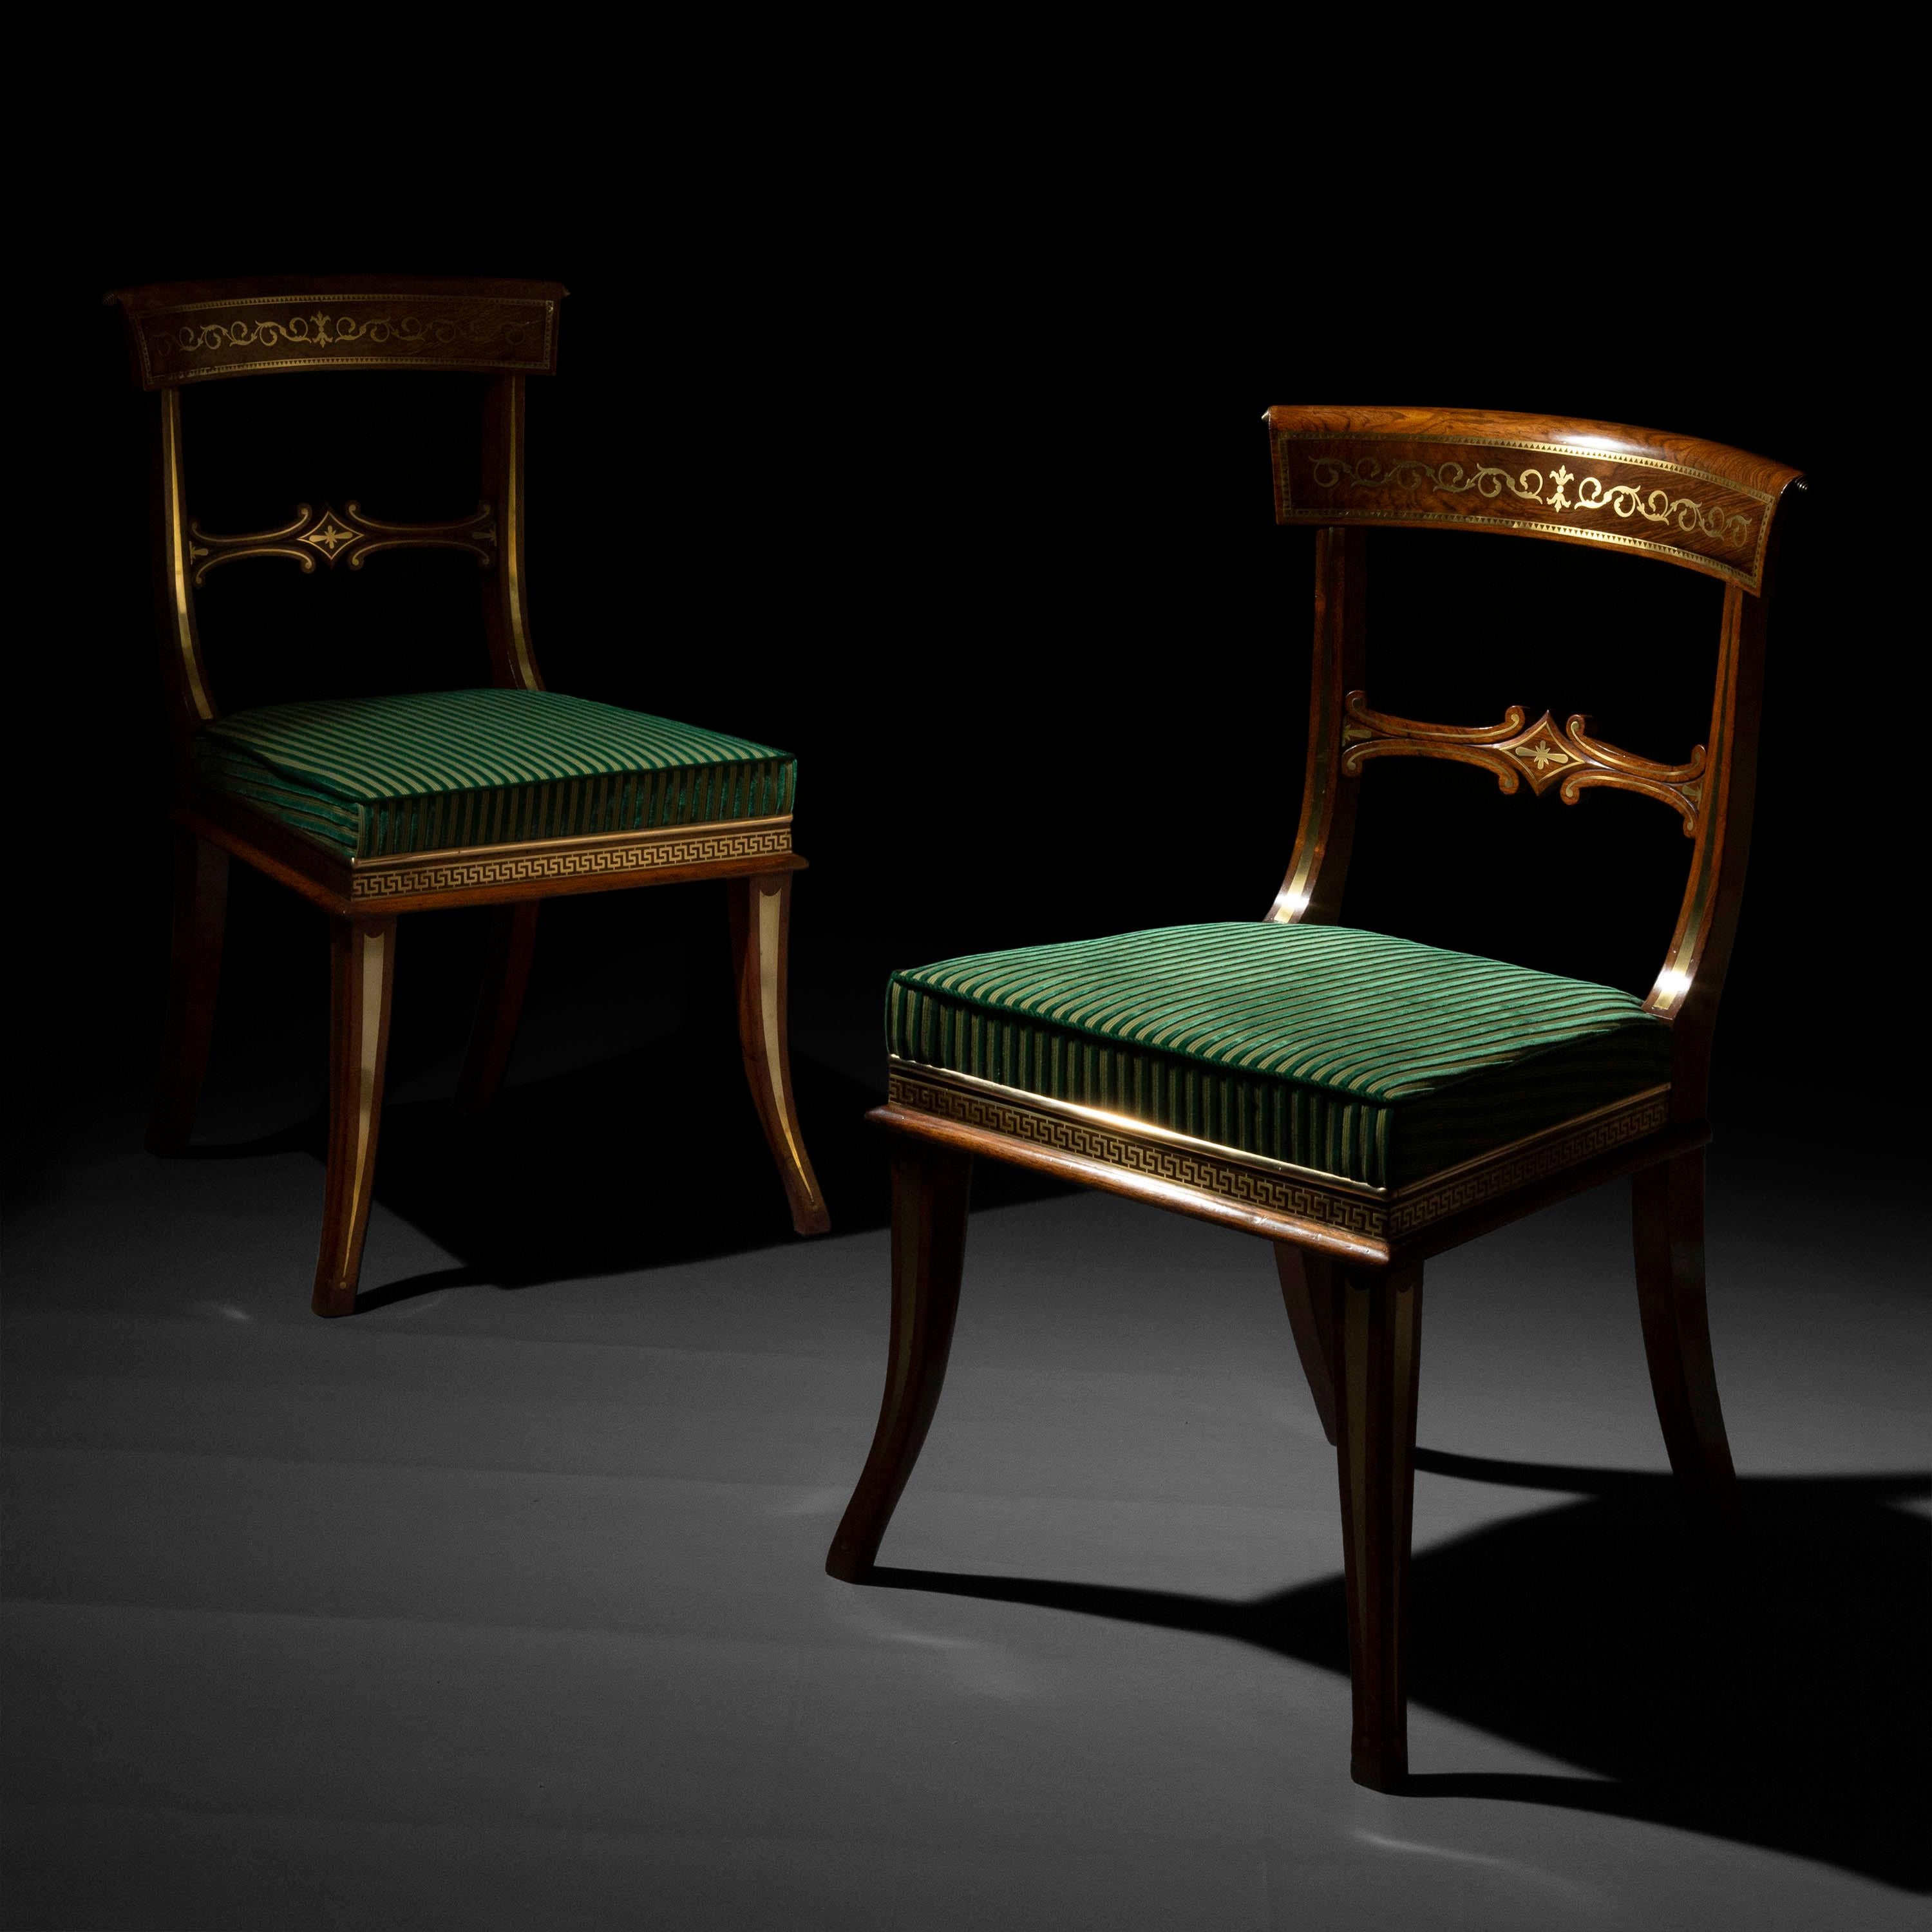 Hand-Carved A Pair of Klismos Chairs, Attributed to George Oakley - Eight Chairs Available For Sale